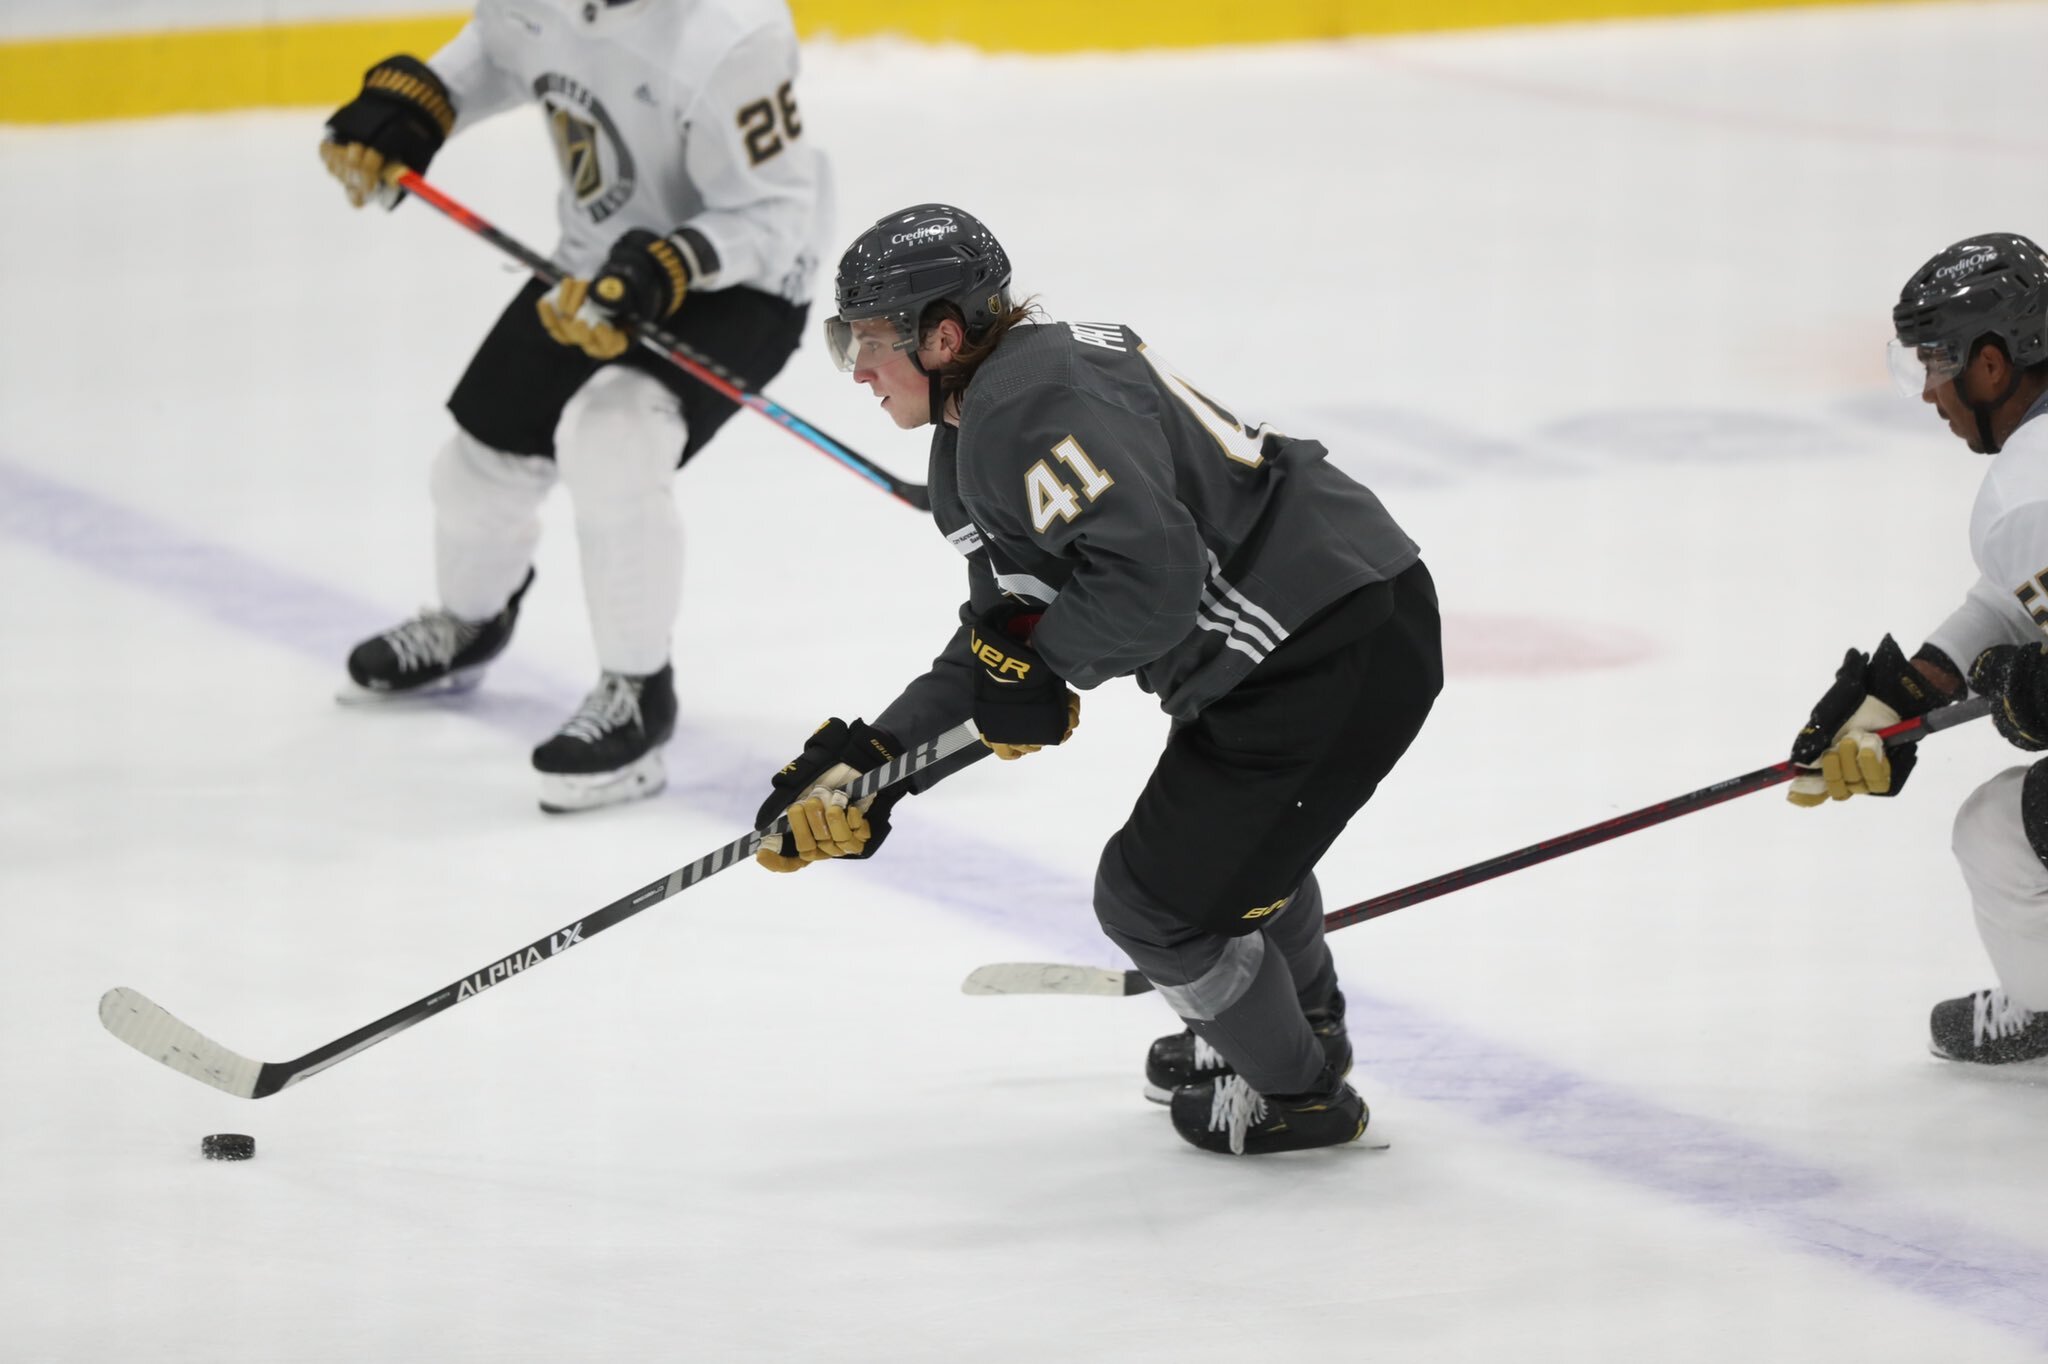 Golden Knights Inaugural Charity Golf Classic — VGK Lifestyle